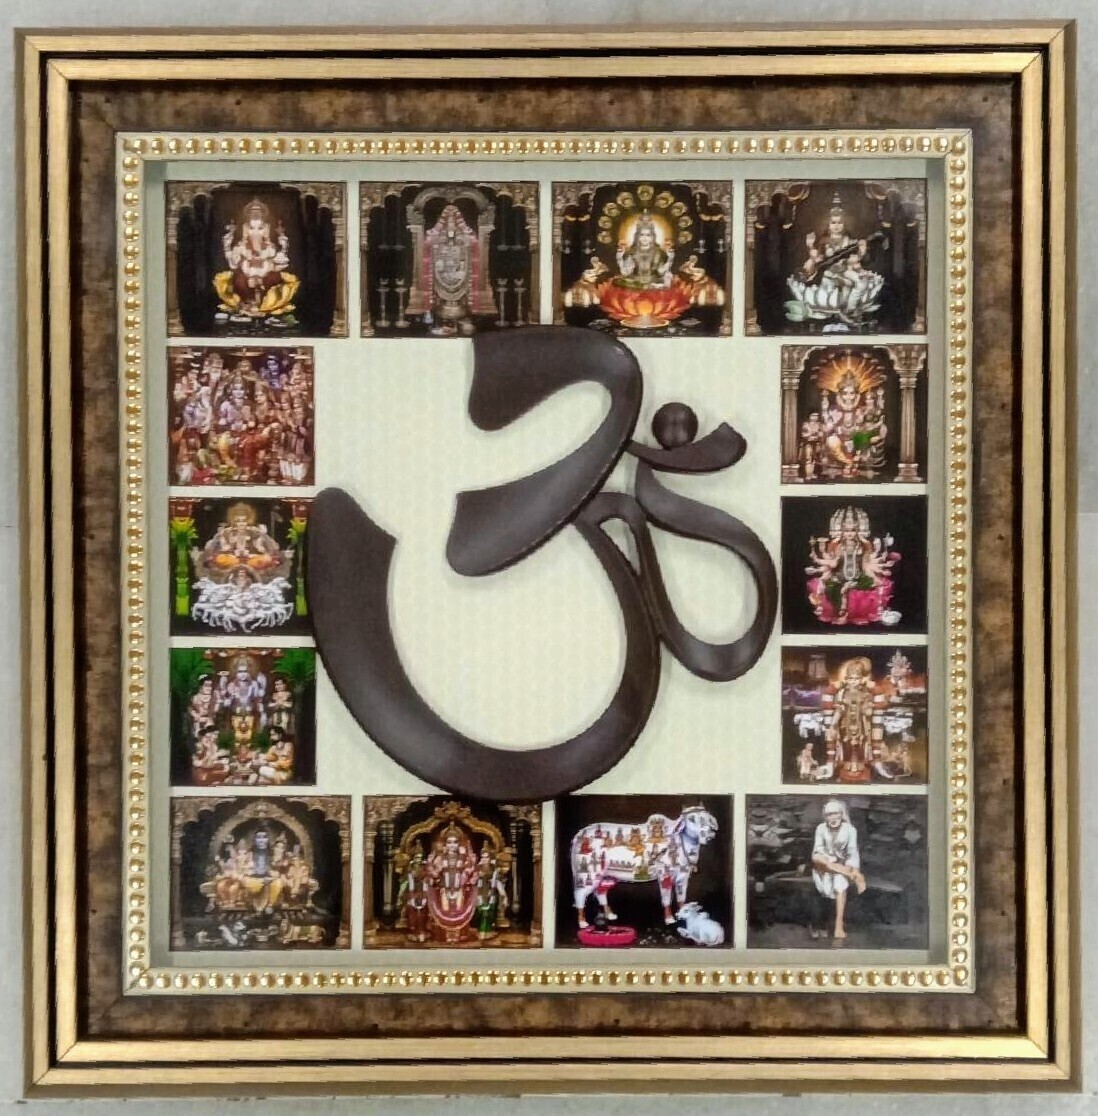 Om Crafted Work with All in one God images Photo Frame - 15.5" x 15.5"